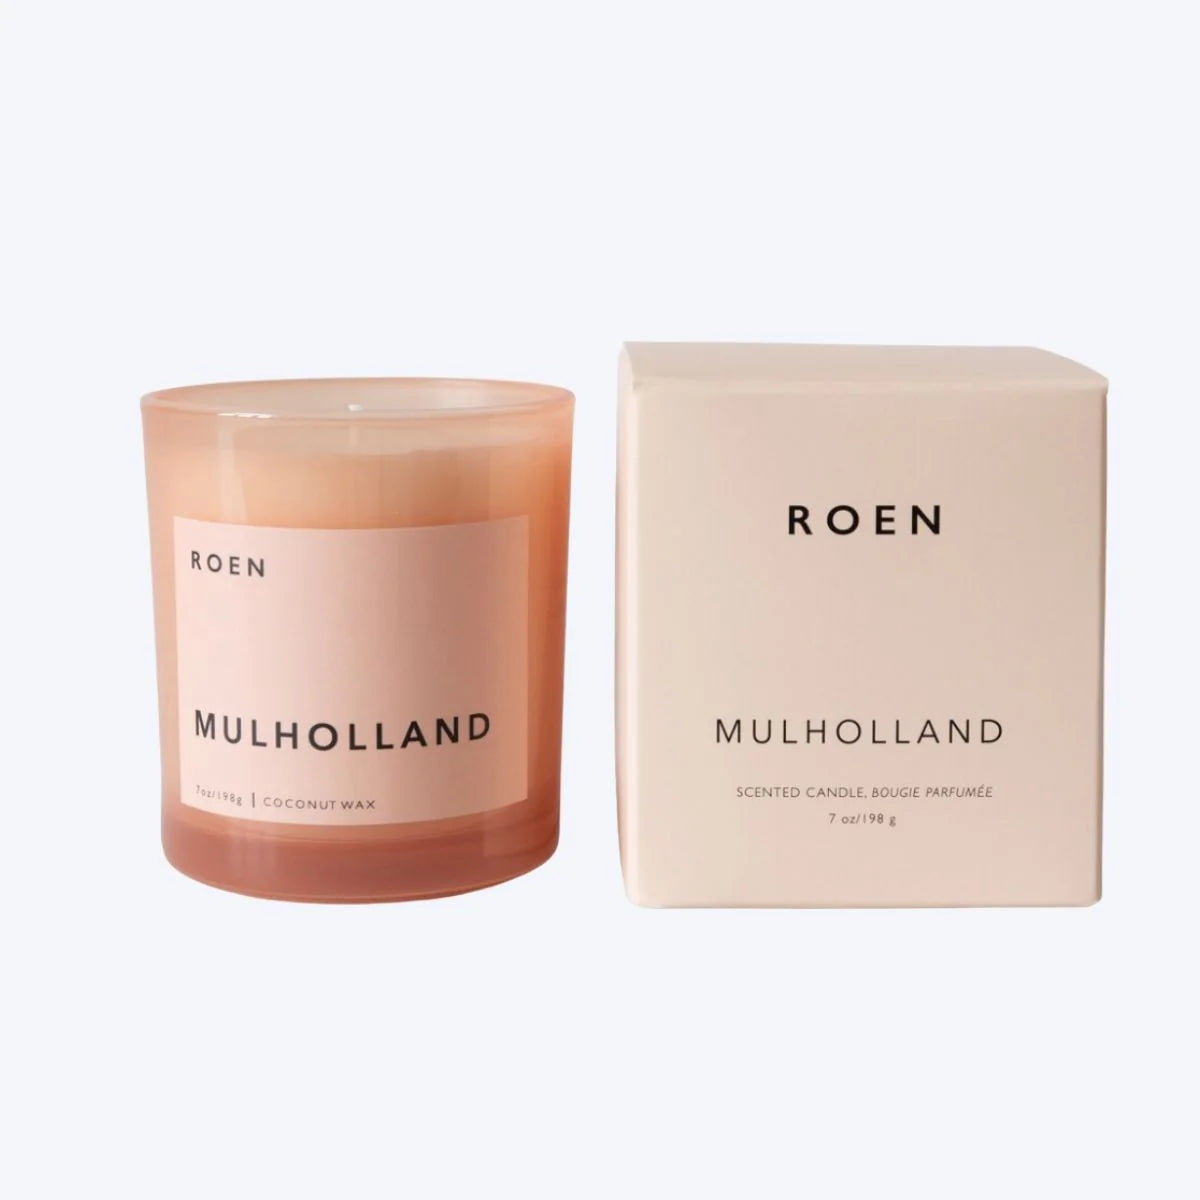 The Mulholland Candle by Roen